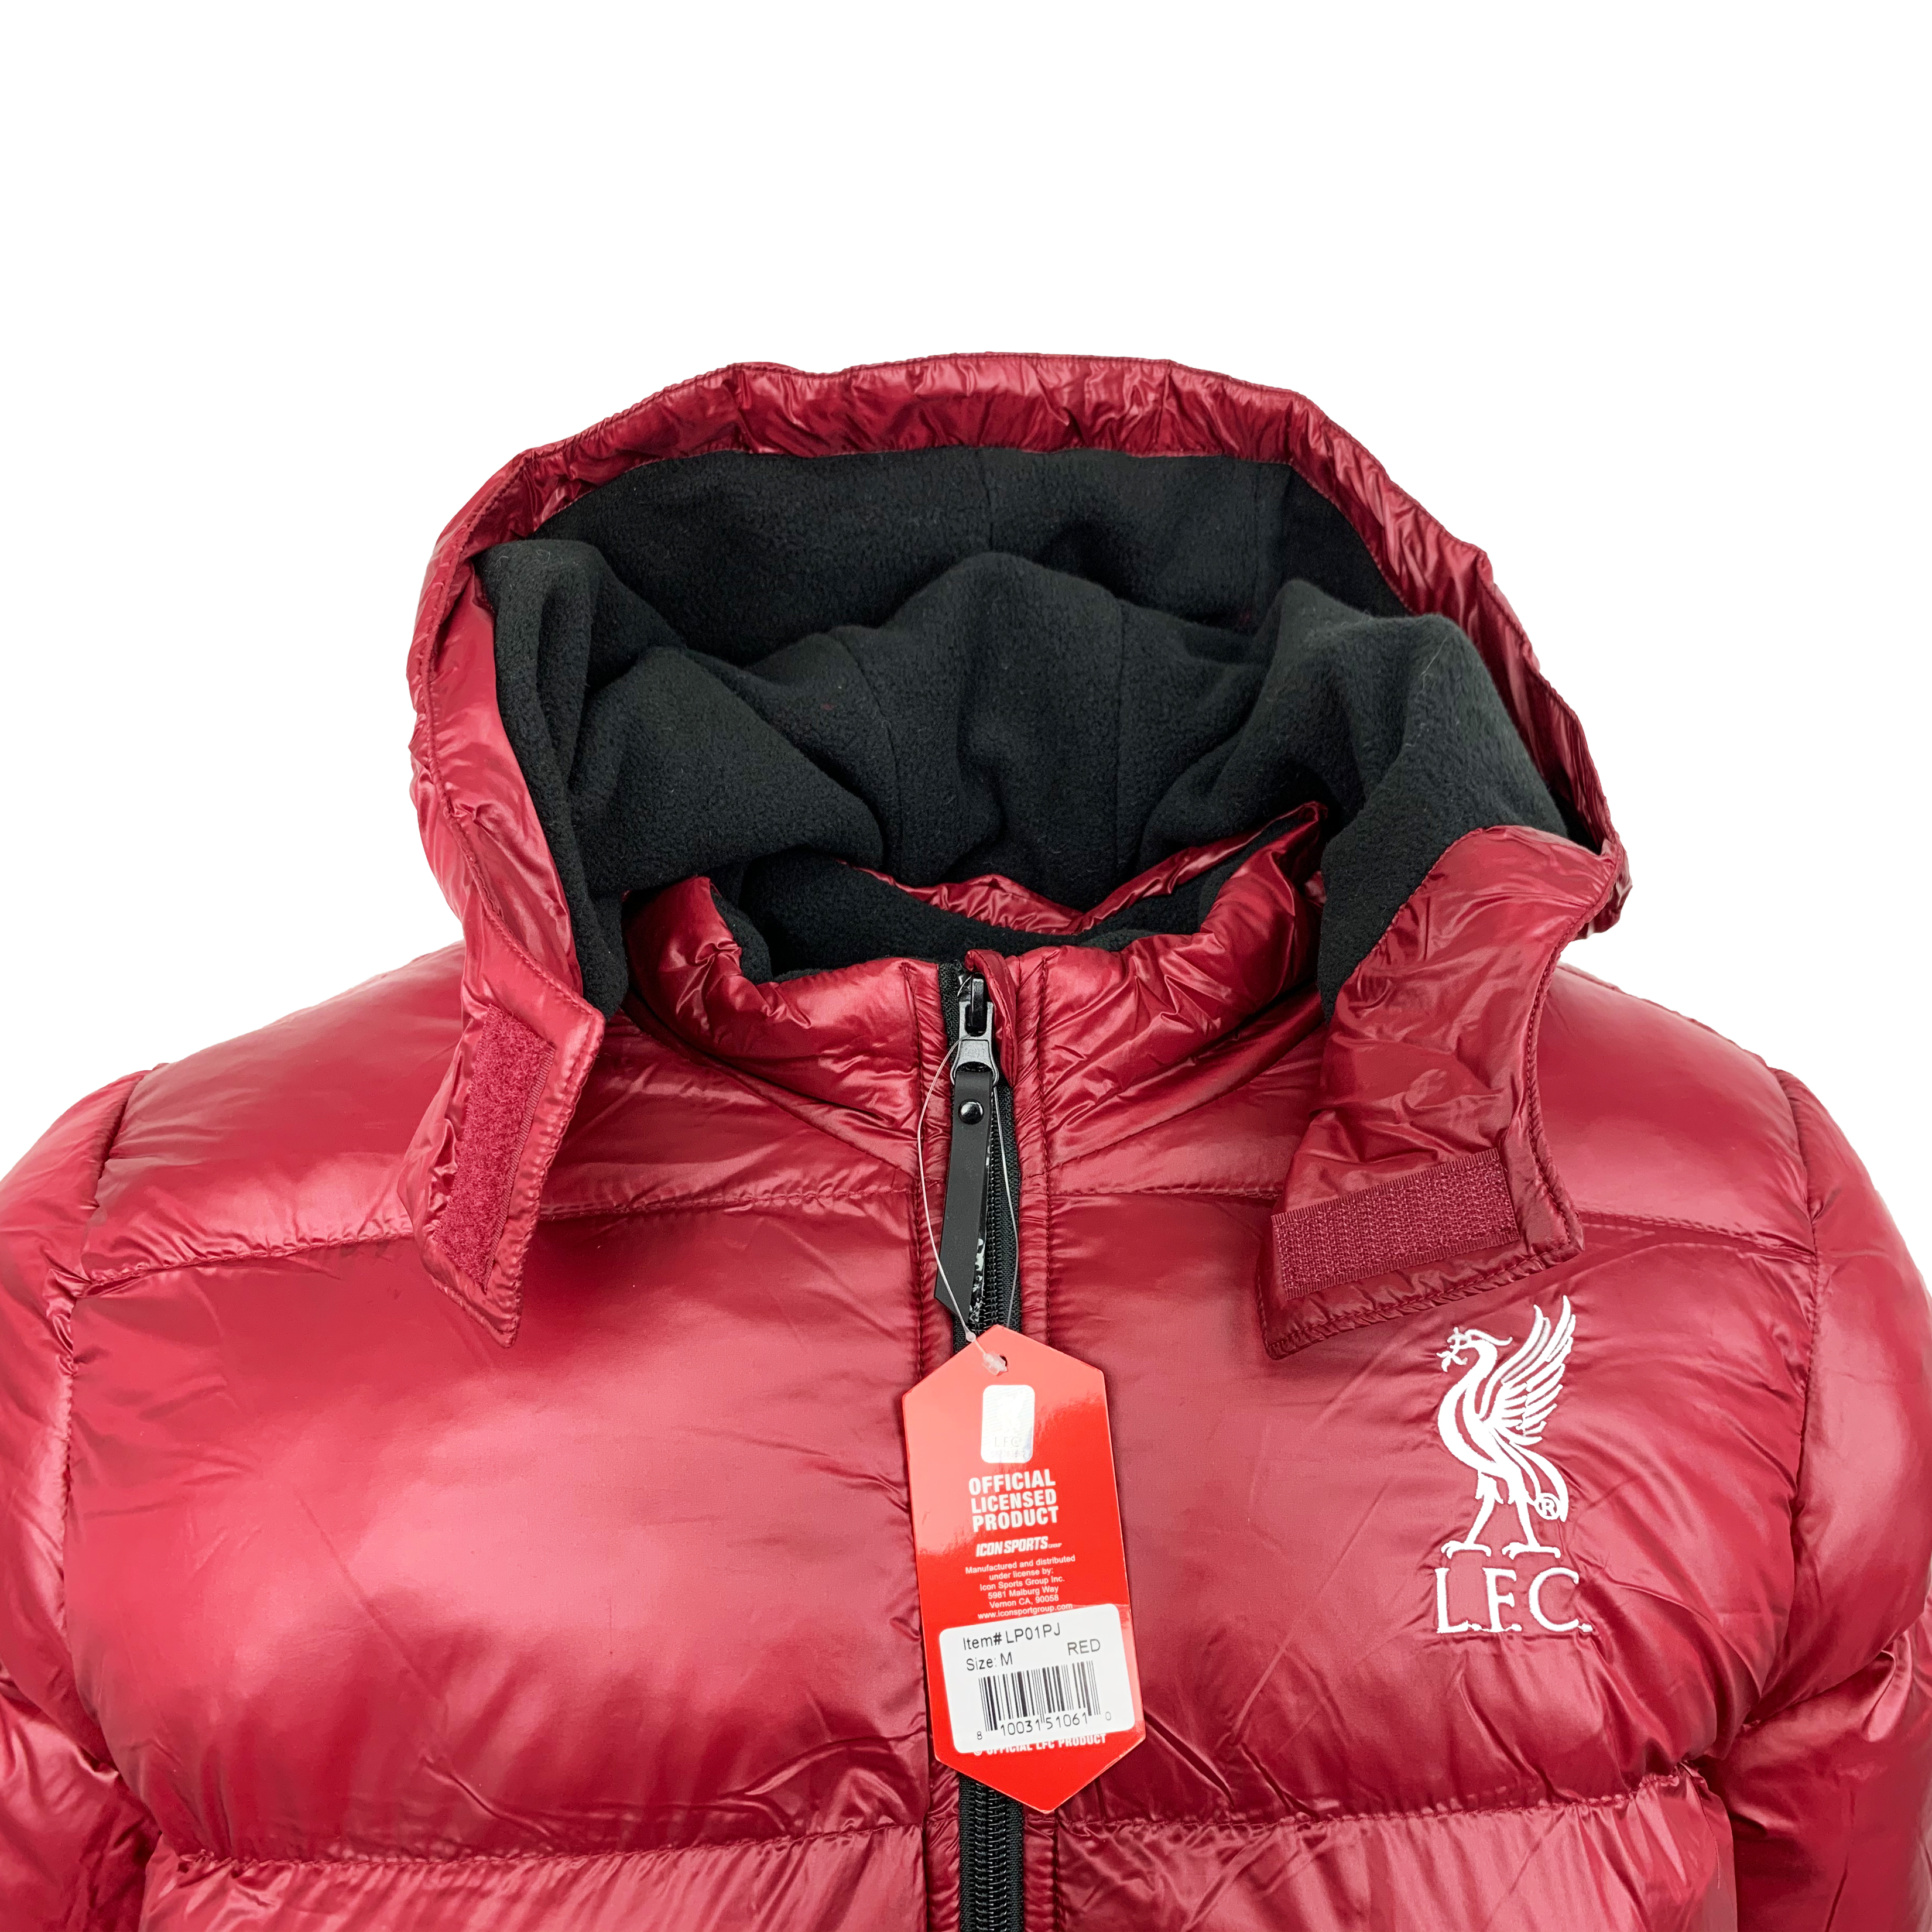 Liverpool Winter Jacket, With Removable Hood, Licensed Liverpool Puffer Jacket (YM) - image 3 of 4